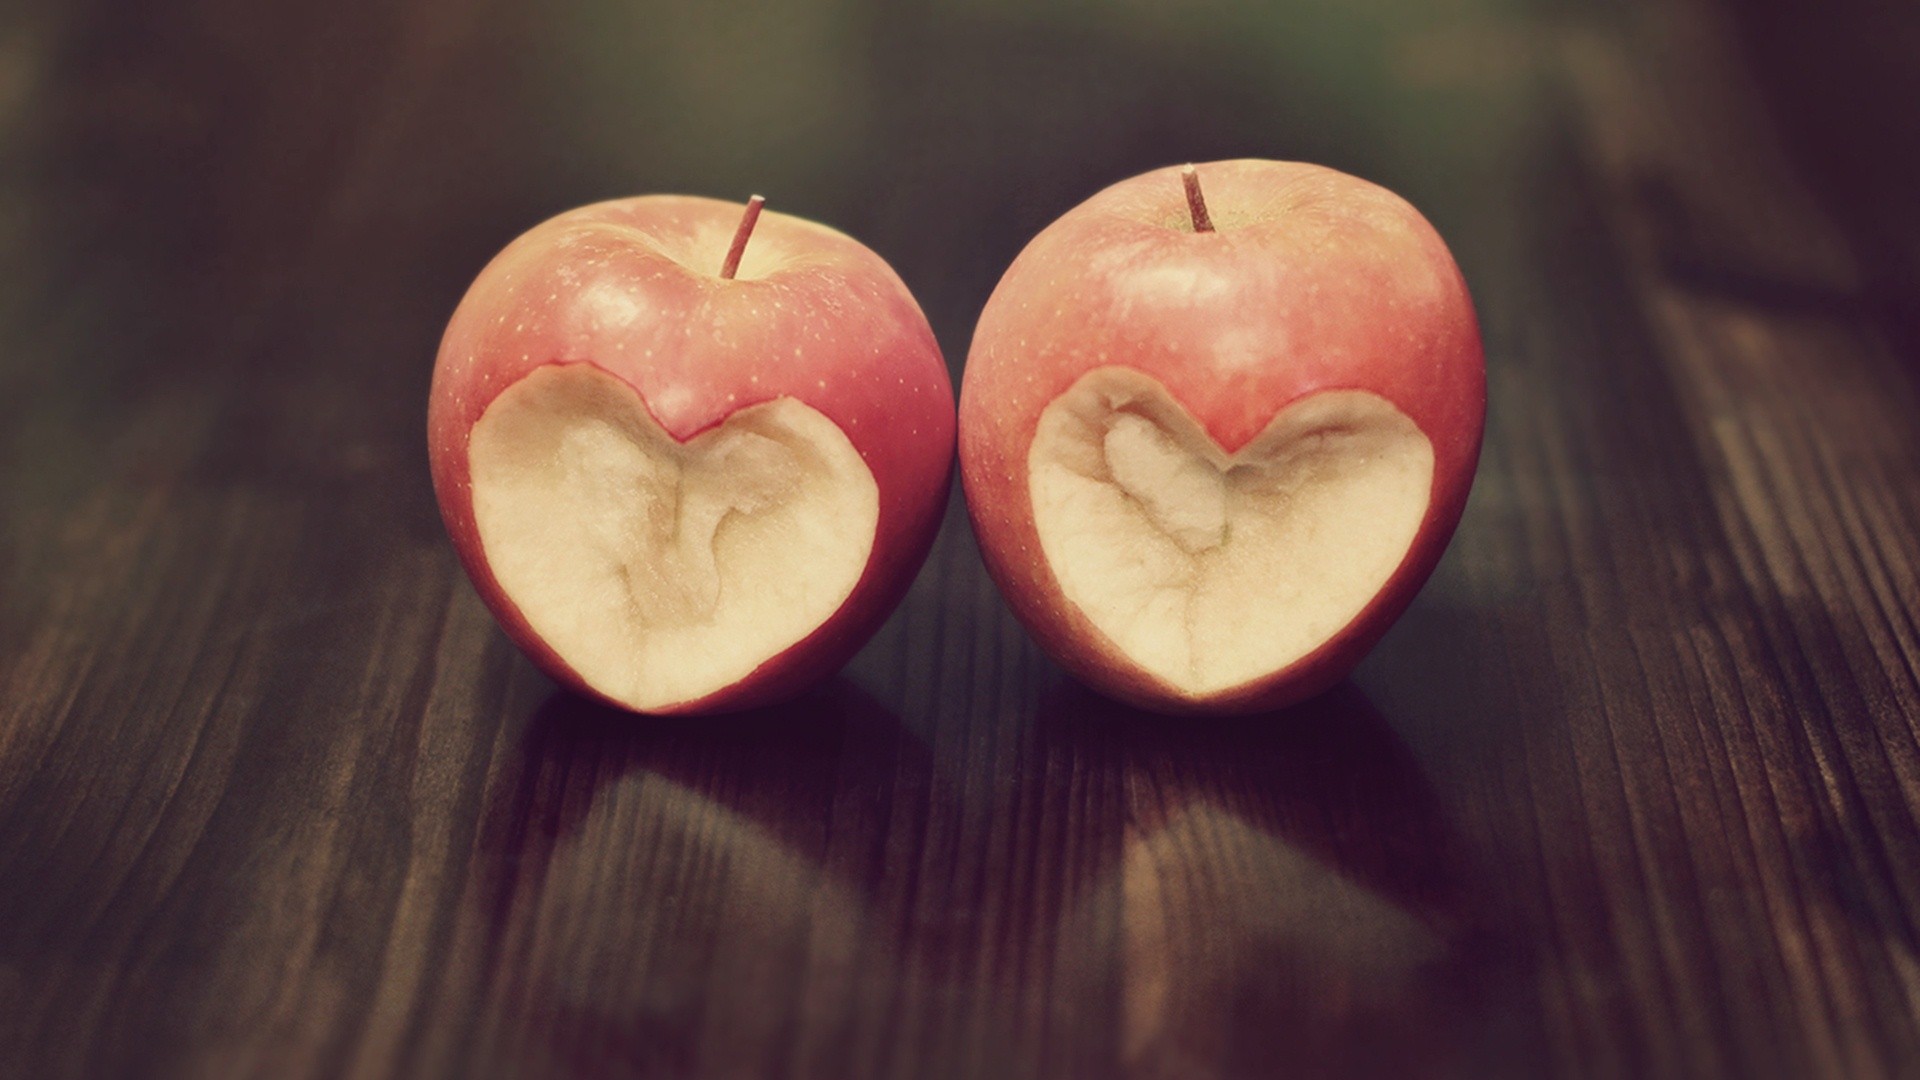 abstract, Hearts, Apples Wallpaper